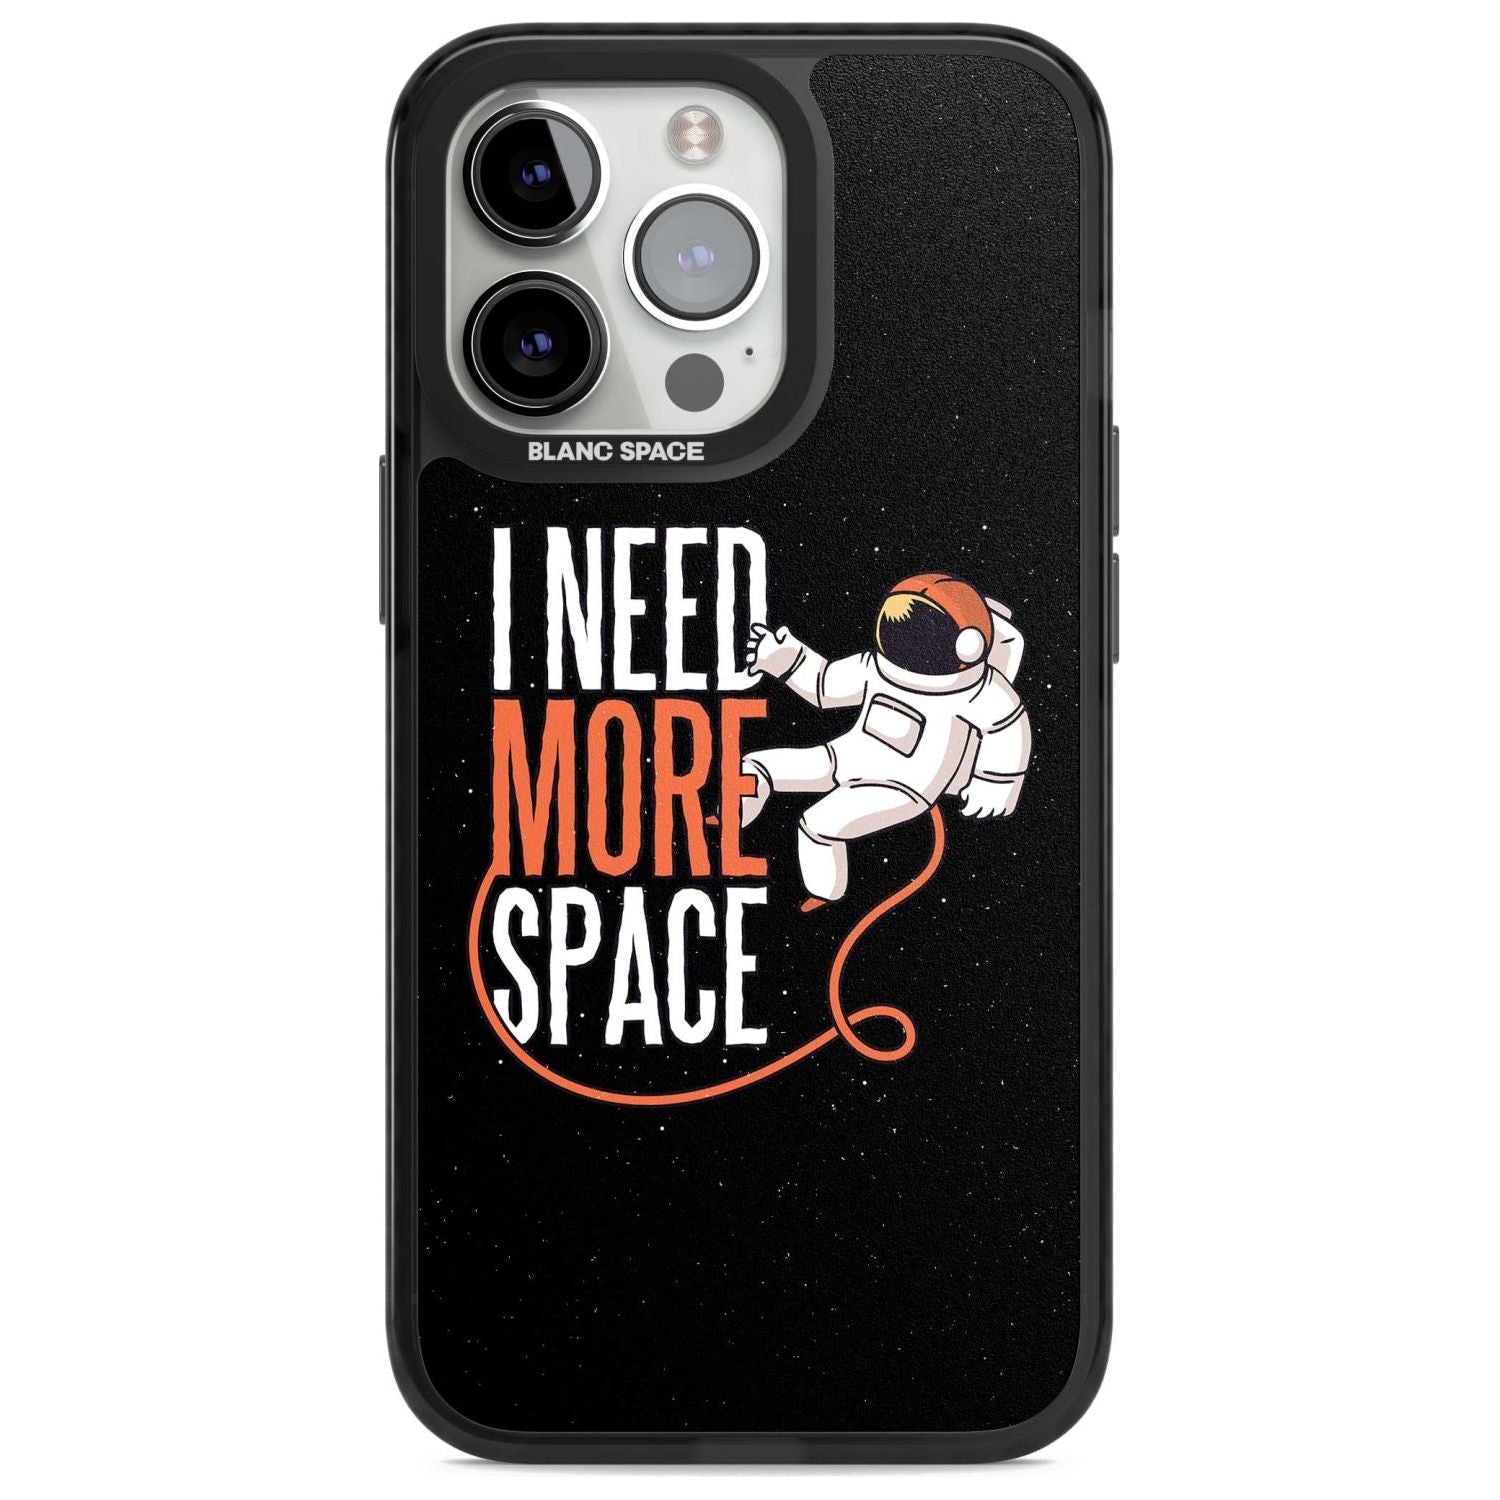 I Need More Space Phone Case iPhone 15 Pro Max / Magsafe Black Impact Case,iPhone 15 Pro / Magsafe Black Impact Case,iPhone 14 Pro Max / Magsafe Black Impact Case,iPhone 14 Pro / Magsafe Black Impact Case,iPhone 13 Pro / Magsafe Black Impact Case Blanc Space